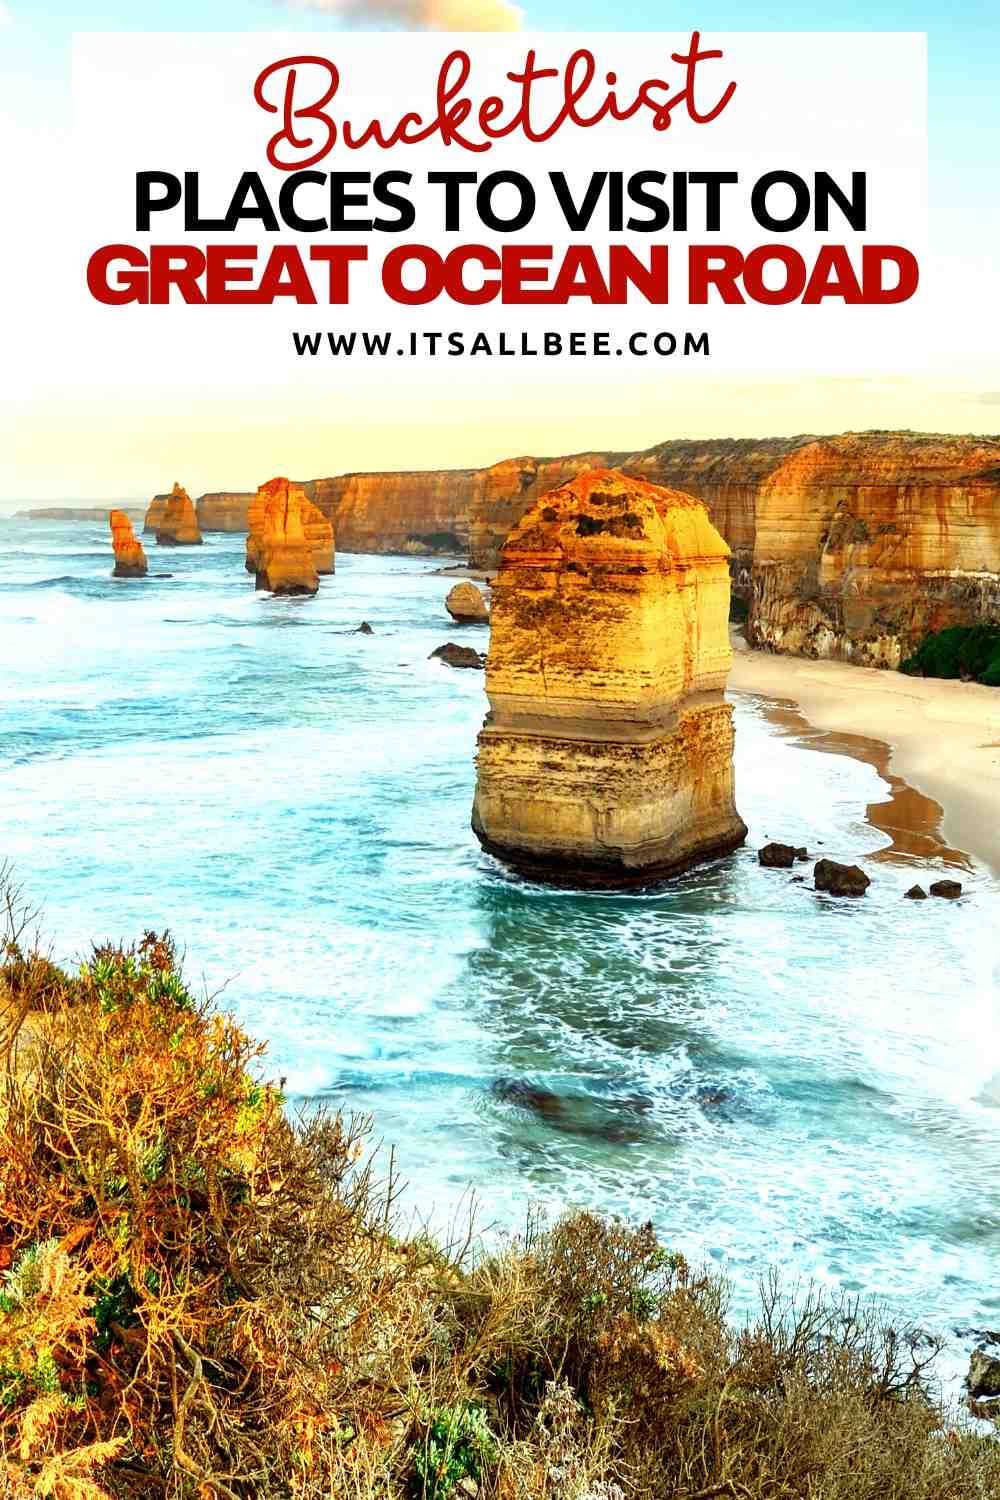 great ocean road itinerary 1 day